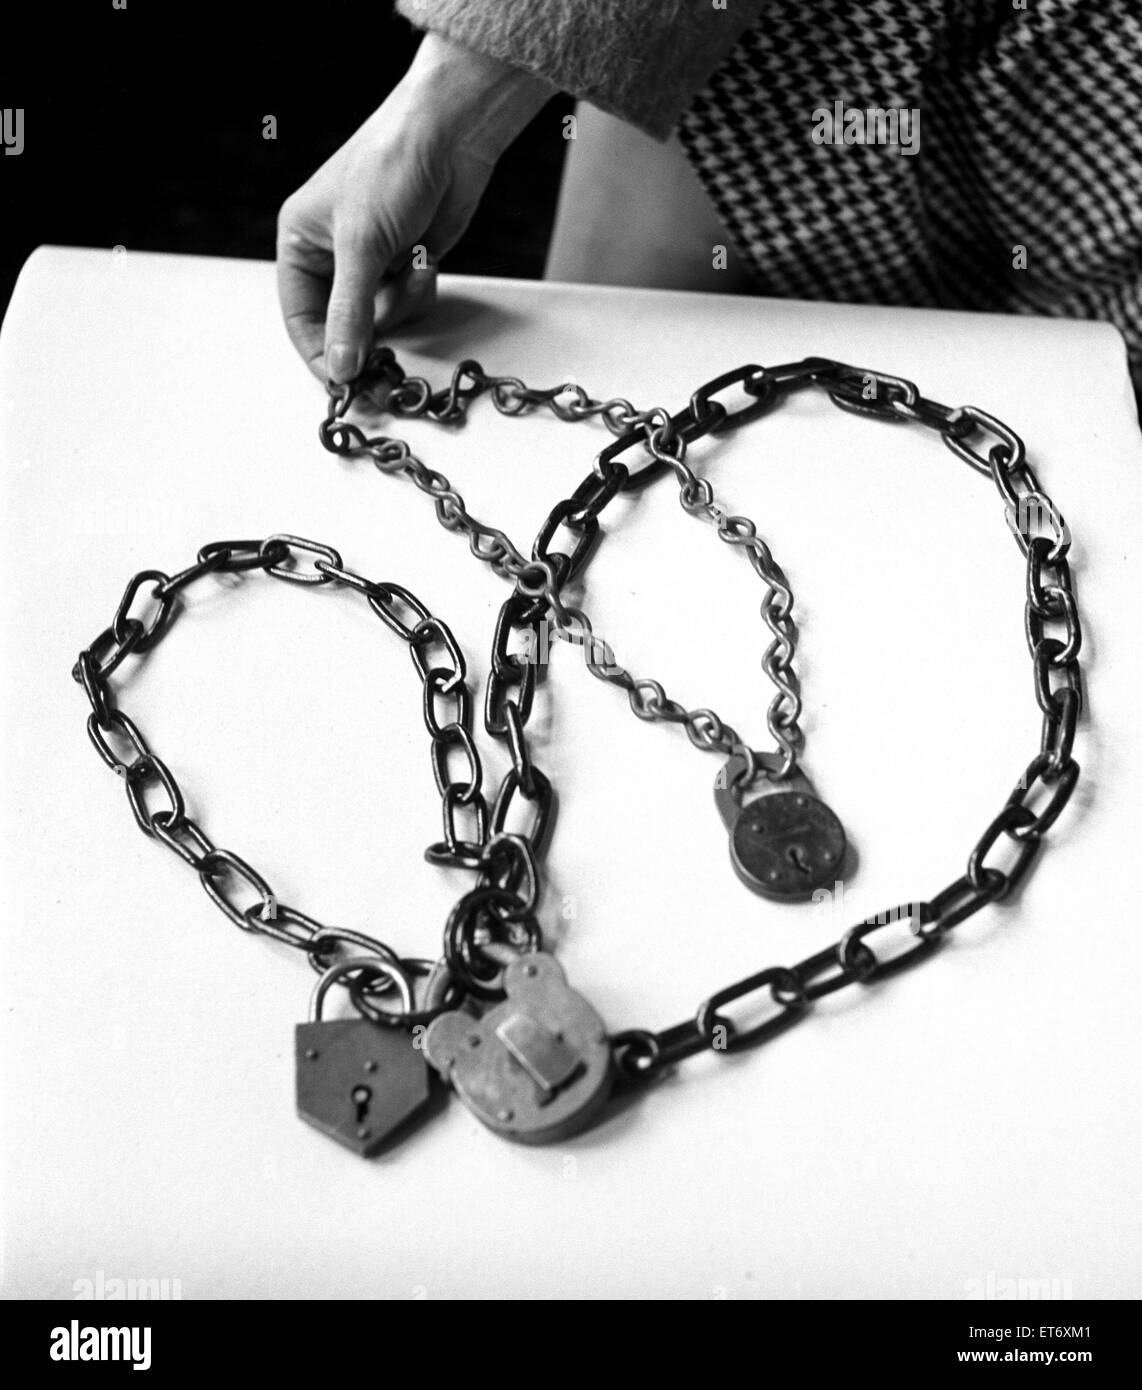 Militant equipment used by women Suffragettes during their campaign for the right to vote. Seen in a museum in South Kensington, London. Pictured are chains and padlocks used by Suffragettes to chain themselves to the Downing Street rails.  19th February Stock Photo